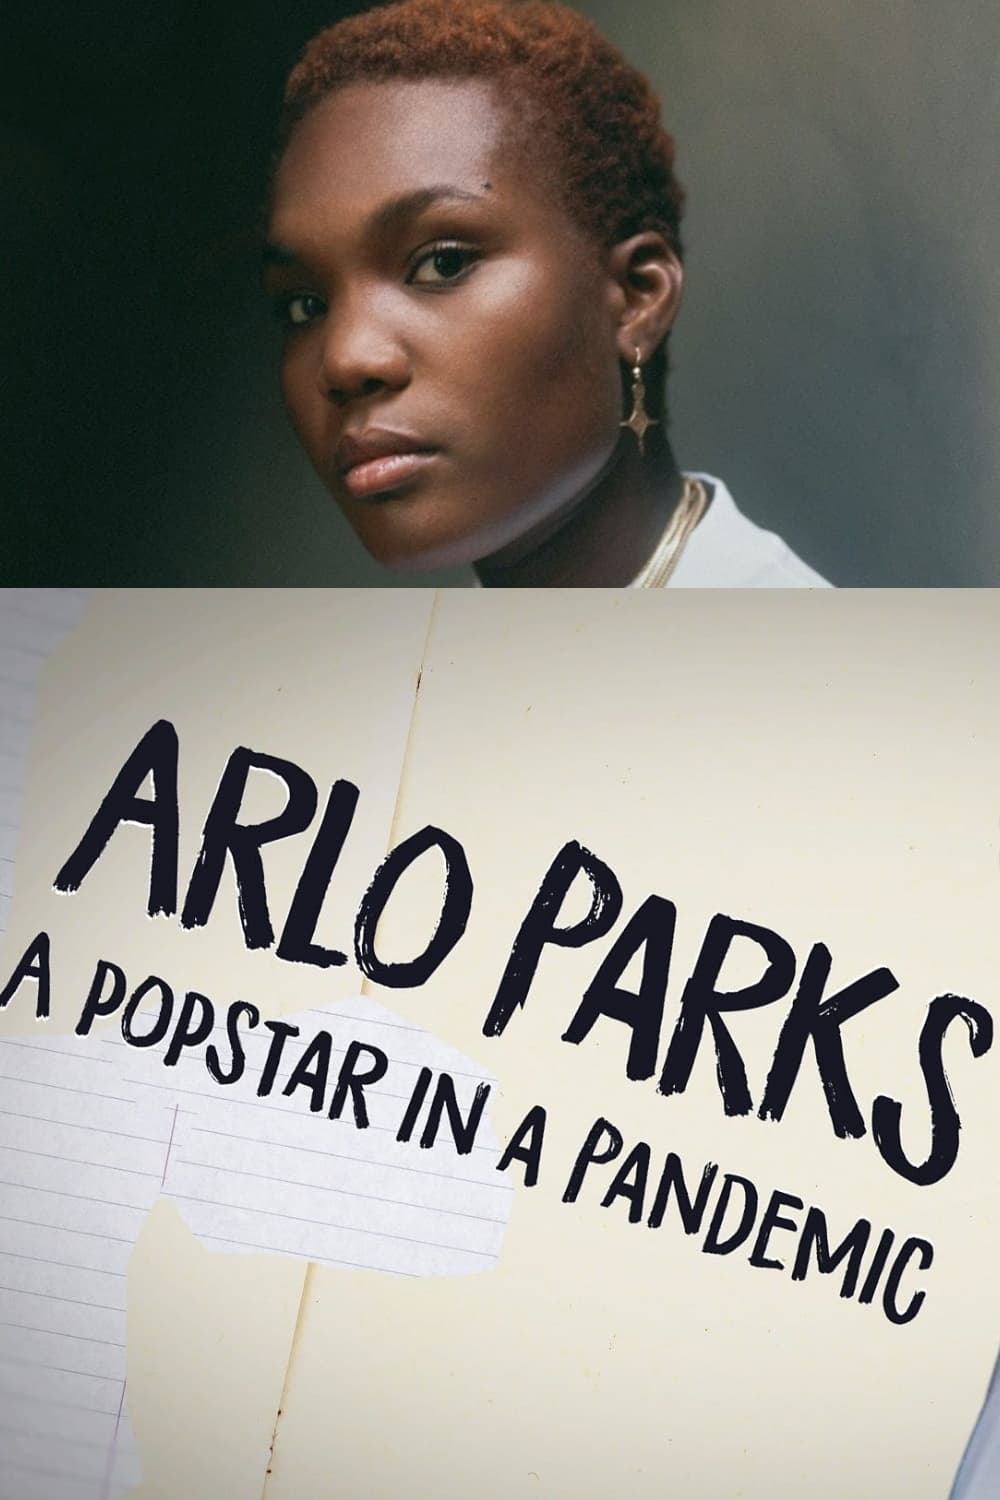 Arlo Parks: A Popstar in a Pandemic